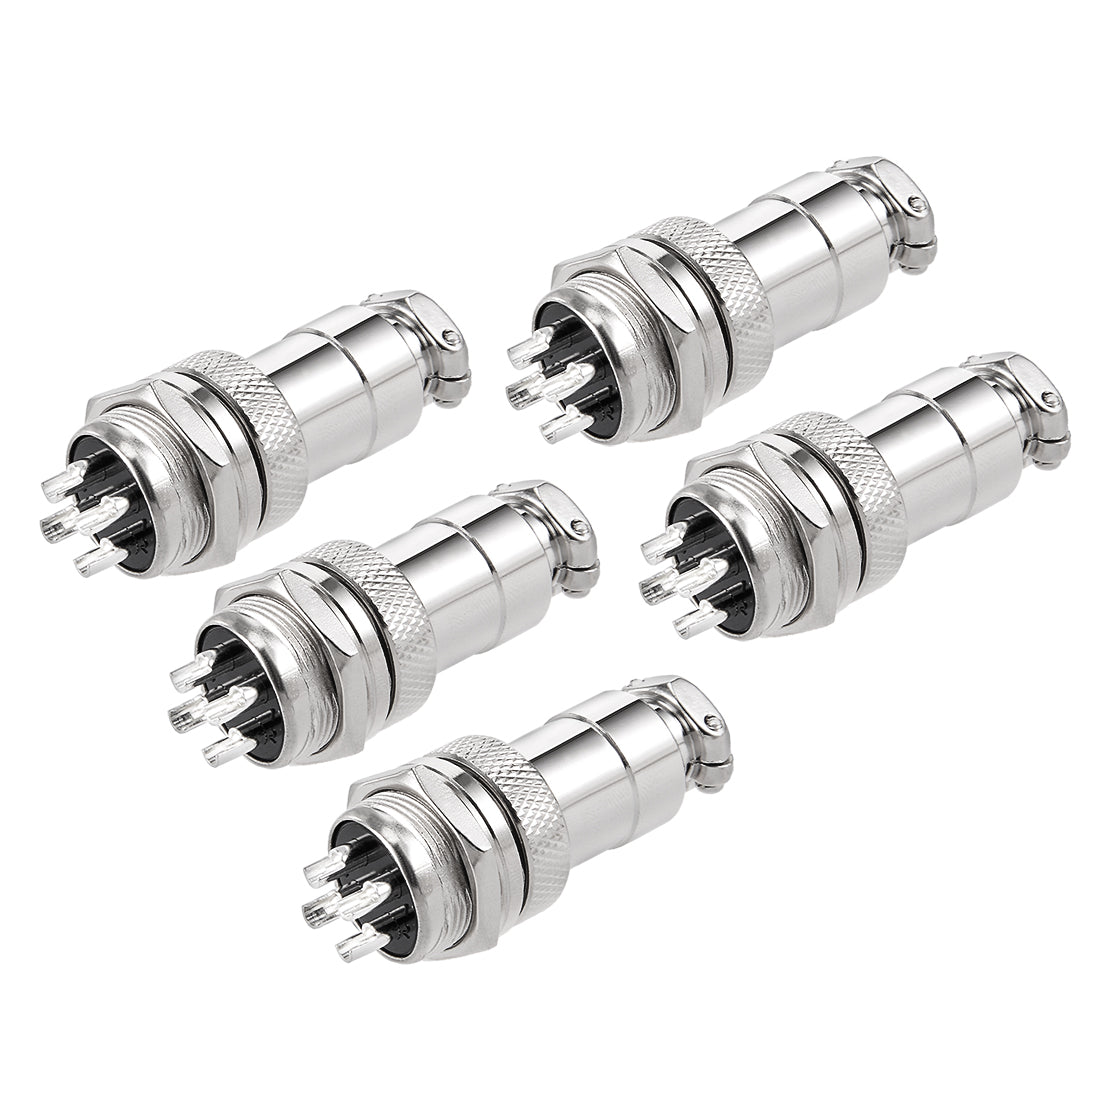 uxcell Uxcell 5pcs Aviation Connector 16mm 4P 5A 125V GX16-4 Waterproof Male Wire Panel Power Chassis Metal Fittings Connector Aviation Silver Tone